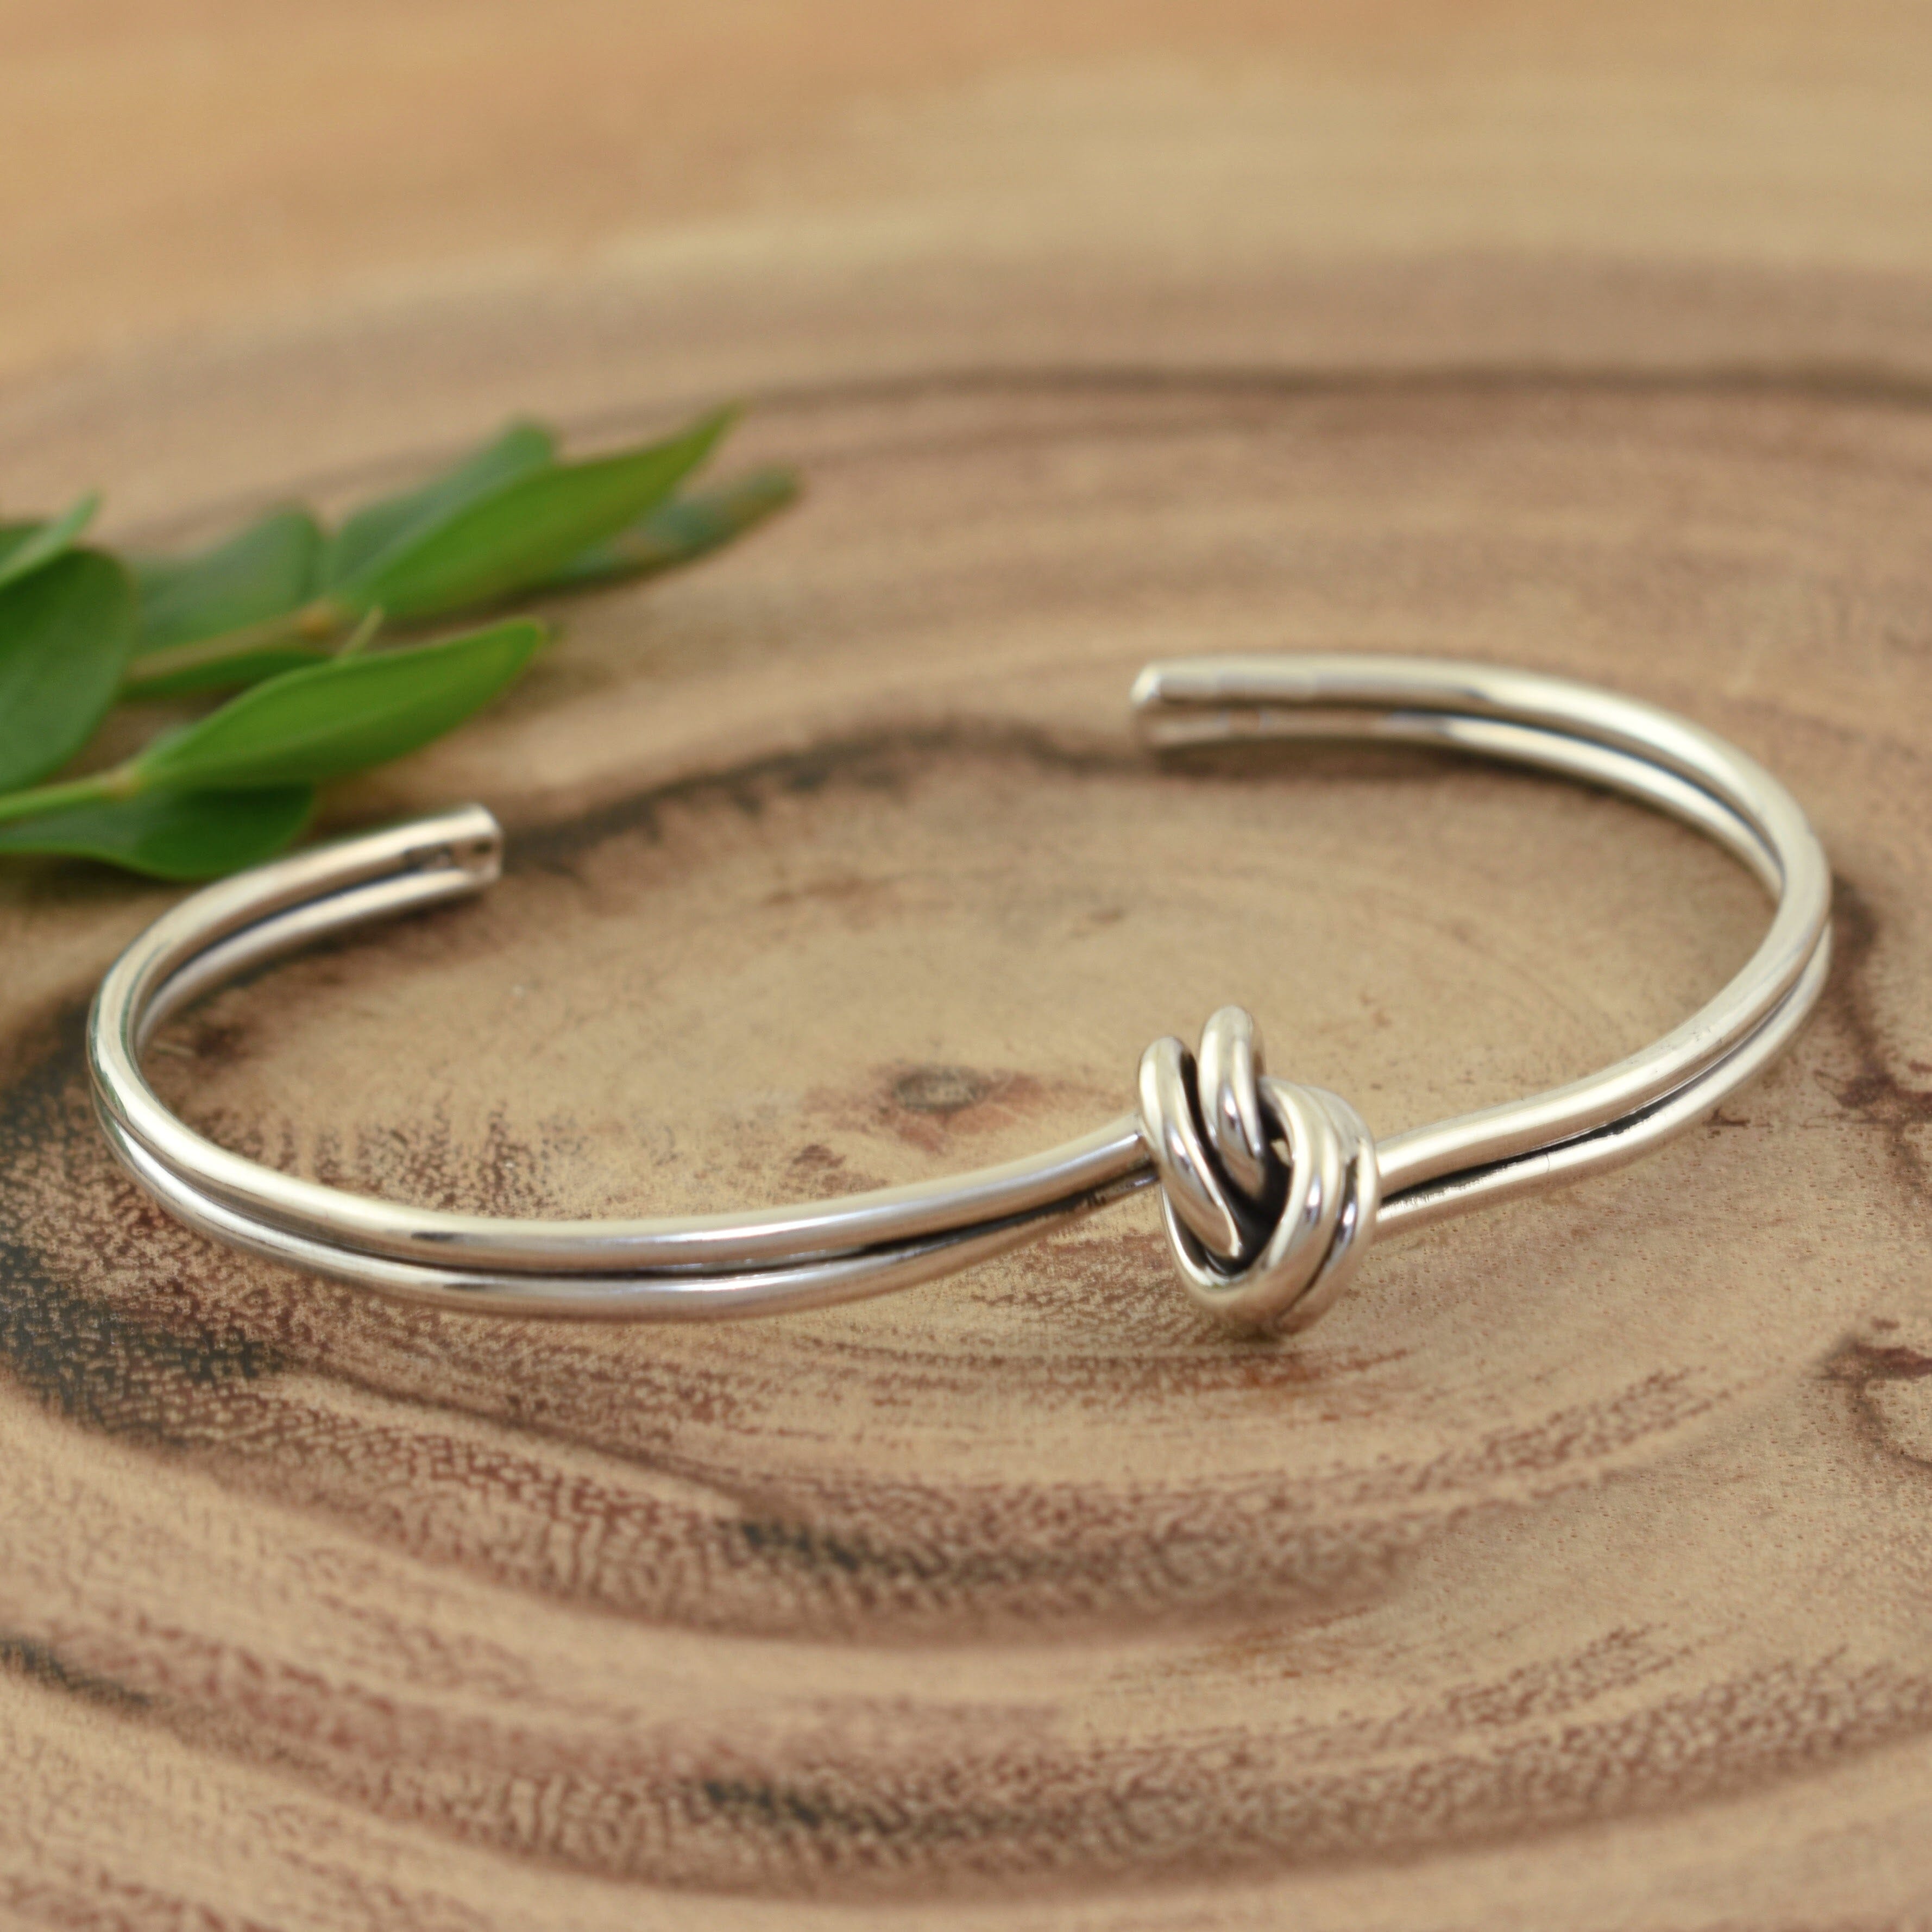 Knotted sterling silver cuff bracelet